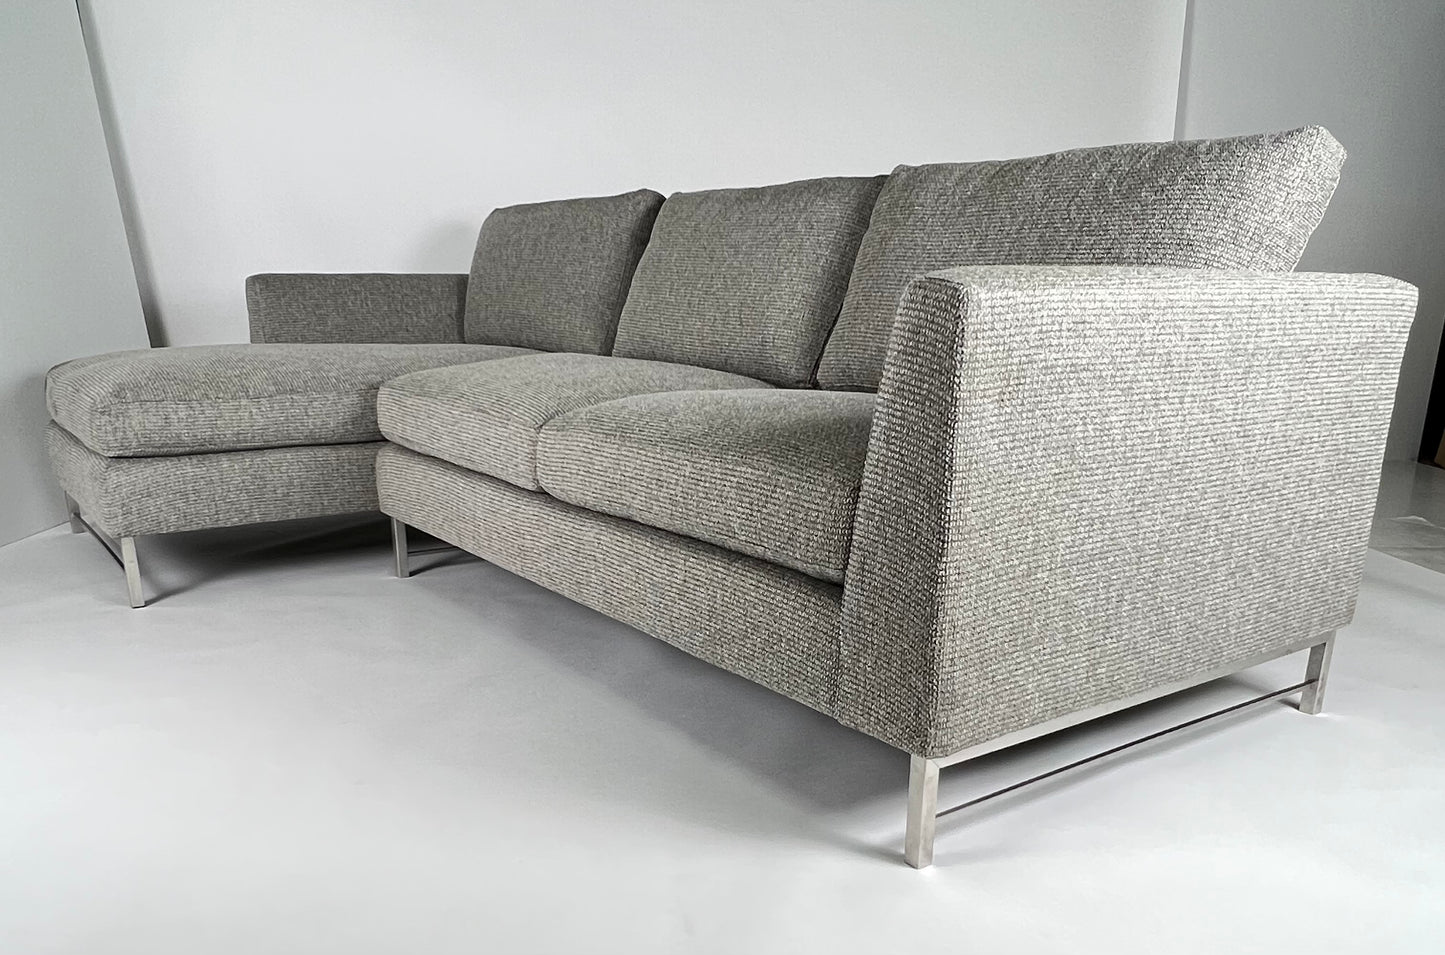 Steely gray blue LAF sectional sofa